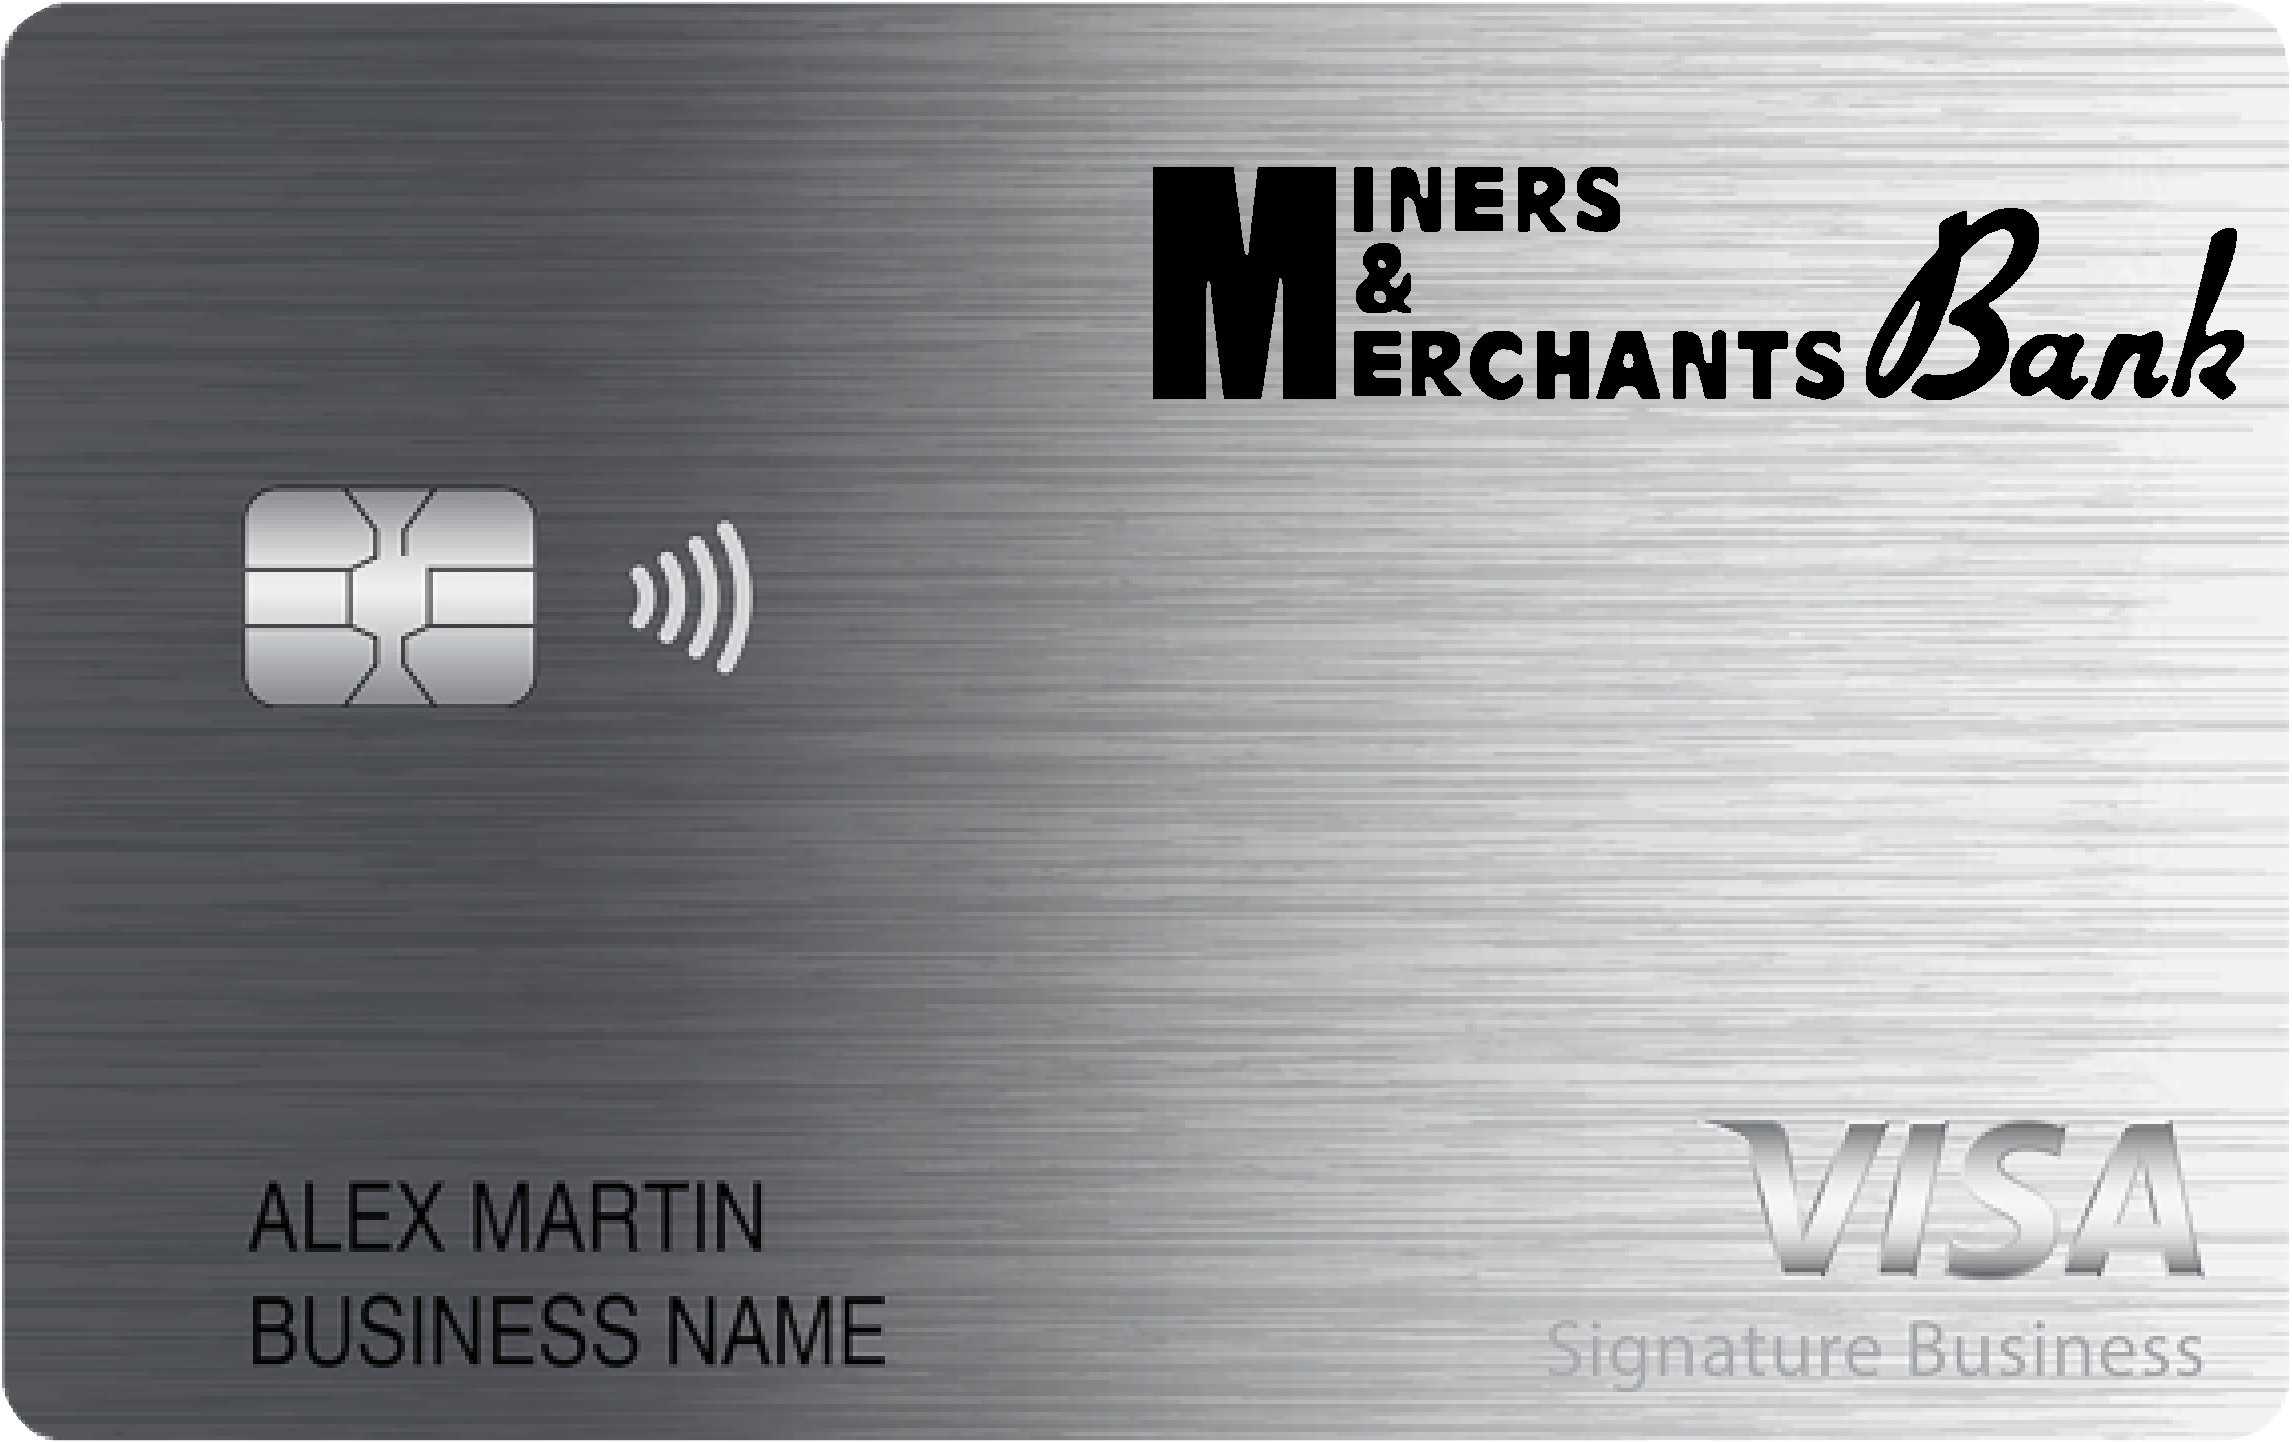 Miners and Merchants Bank Smart Business Rewards Card